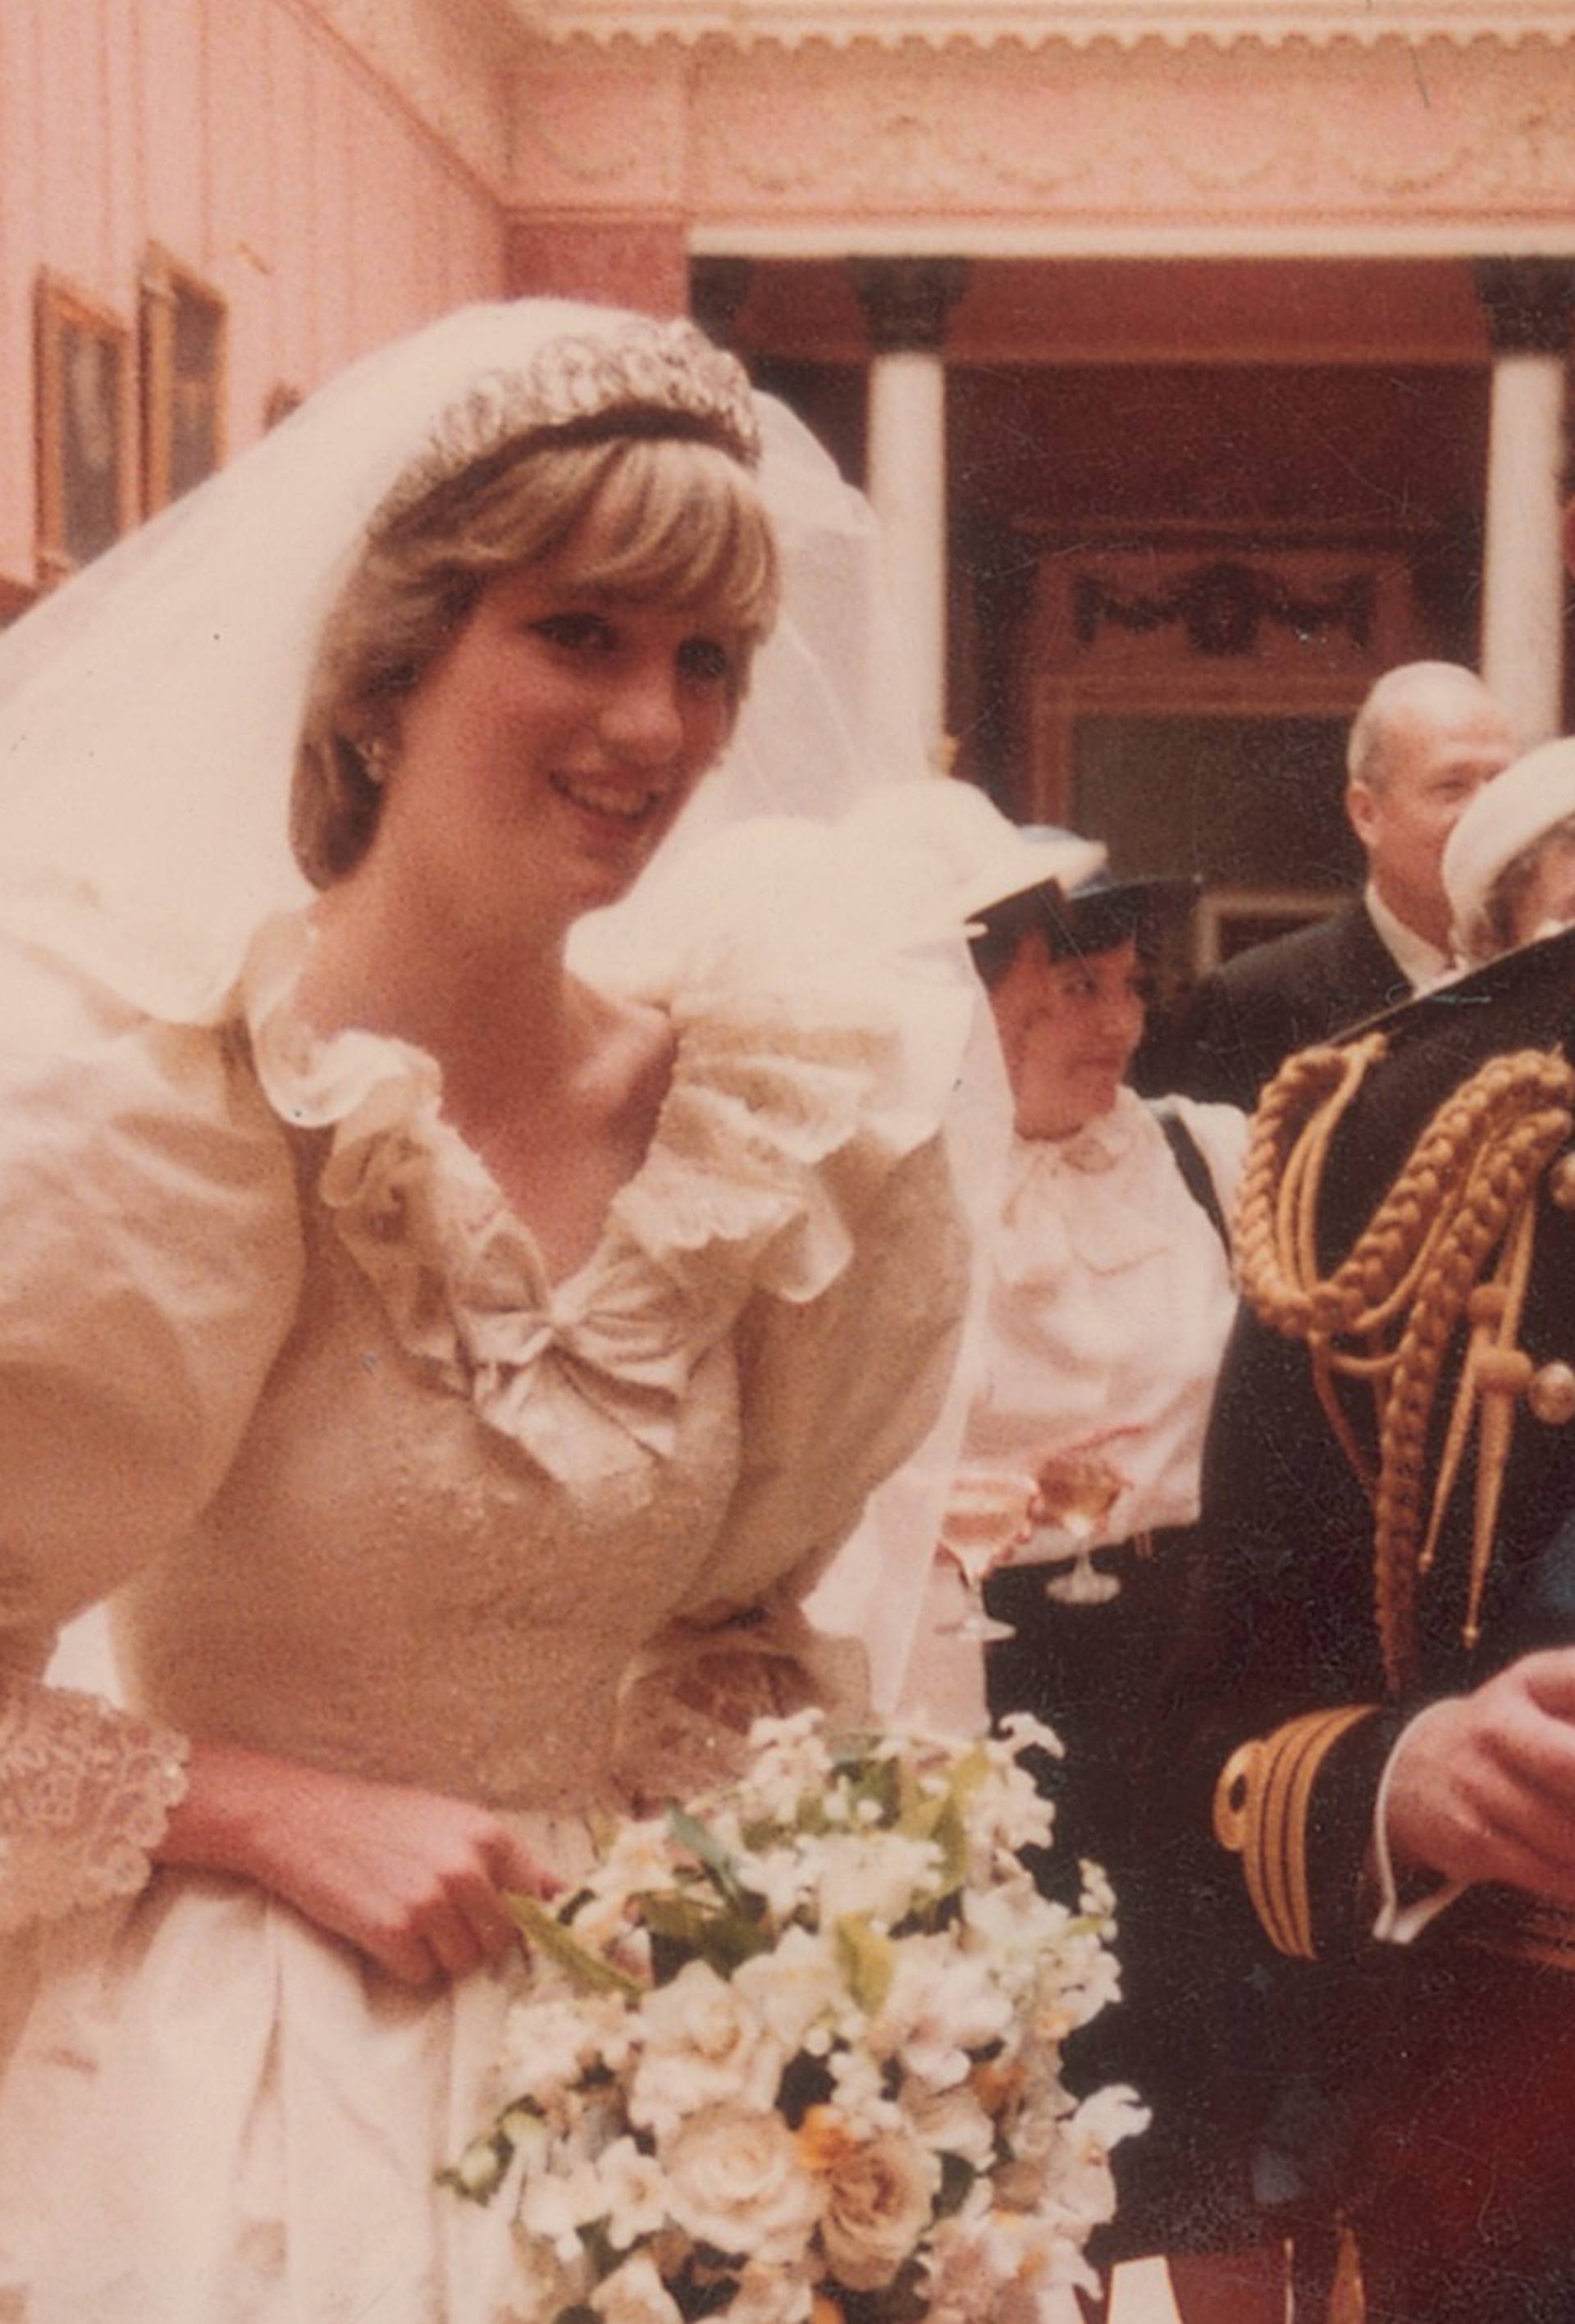 A collection of unpublished photos from the wedding of Princess Diana and Prince Charles at Buckingham Palace (1981)